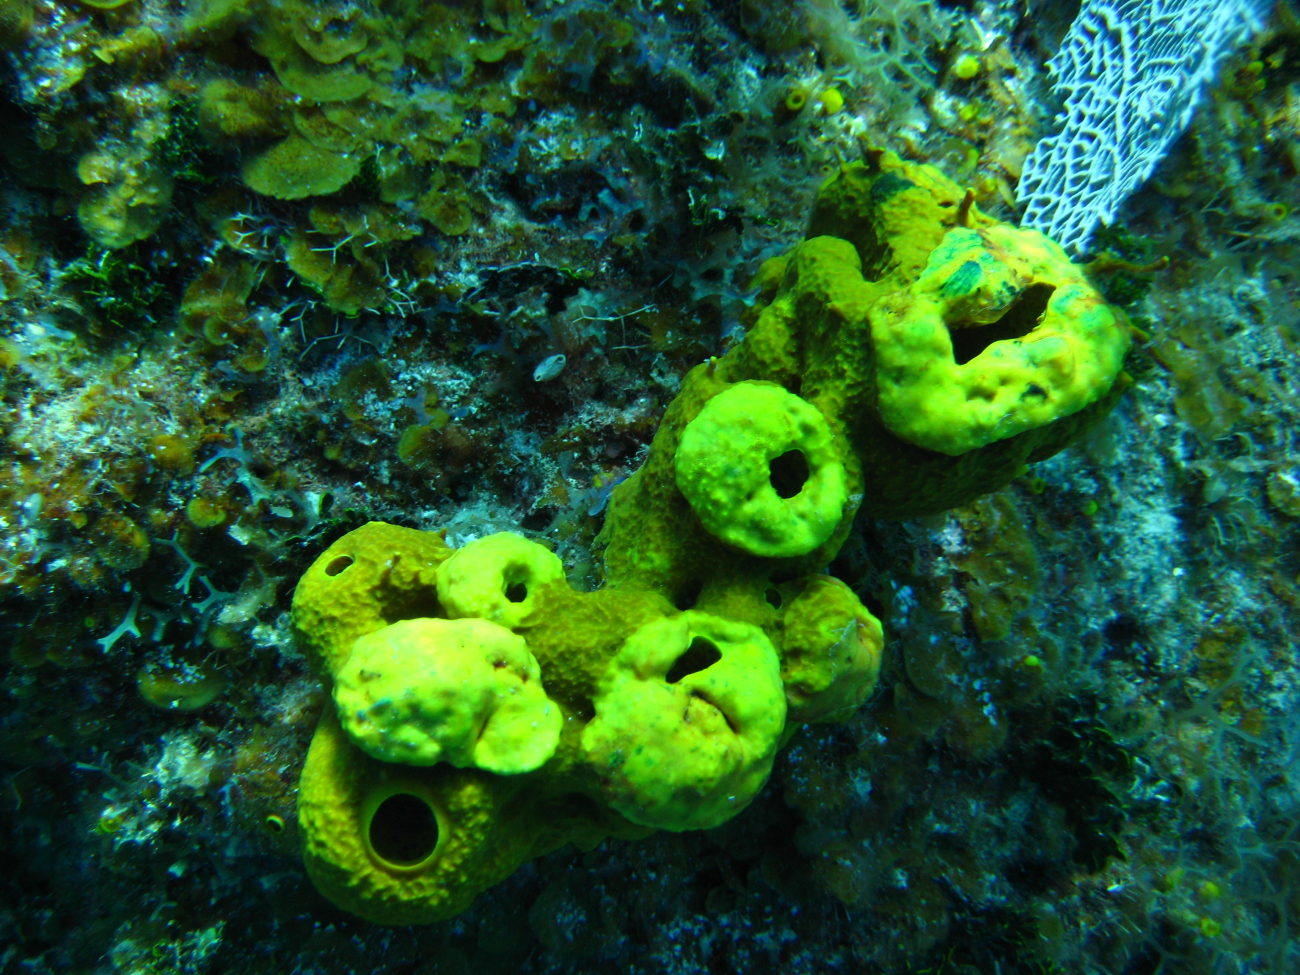 Yellow sponges and what appears to be a bryozoan in the upper right corner